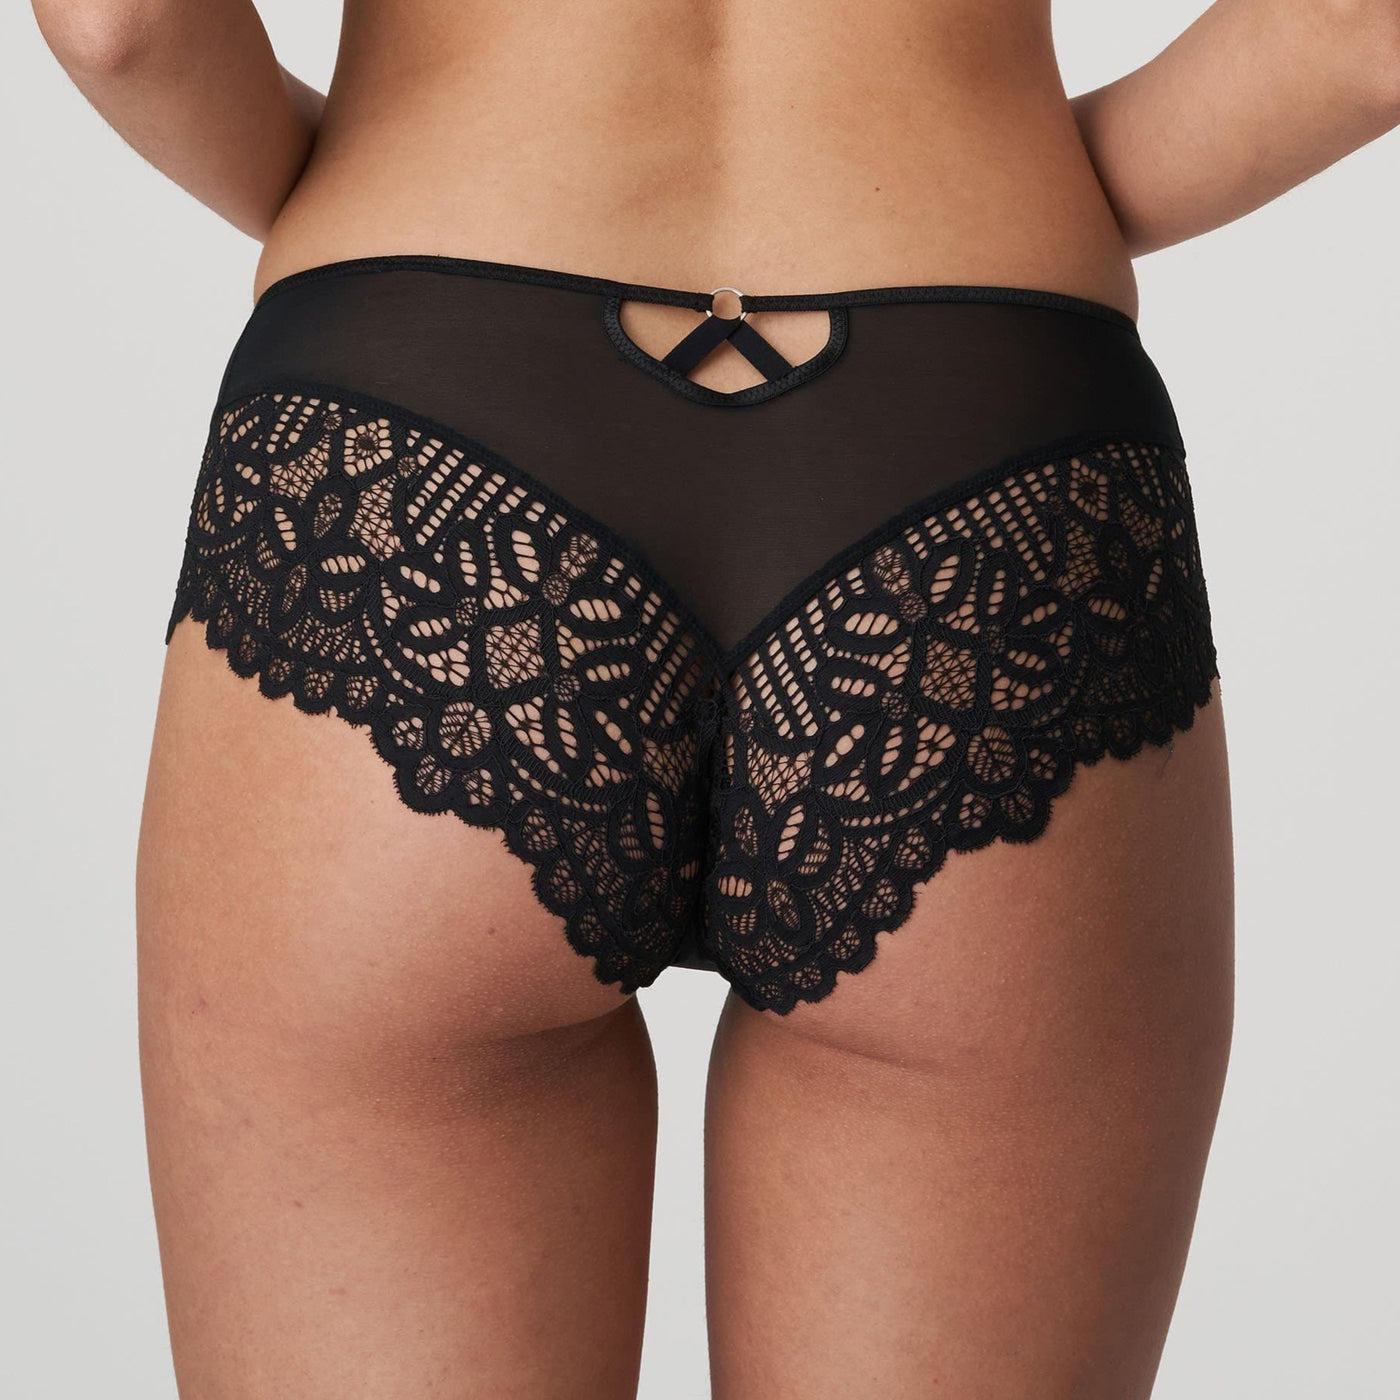 Prima Donna Twist First Night Hot Pant 0541882-Panties-Prima Donna-Black-Small-Anna Bella Fine Lingerie, Reveal Your Most Gorgeous Self!